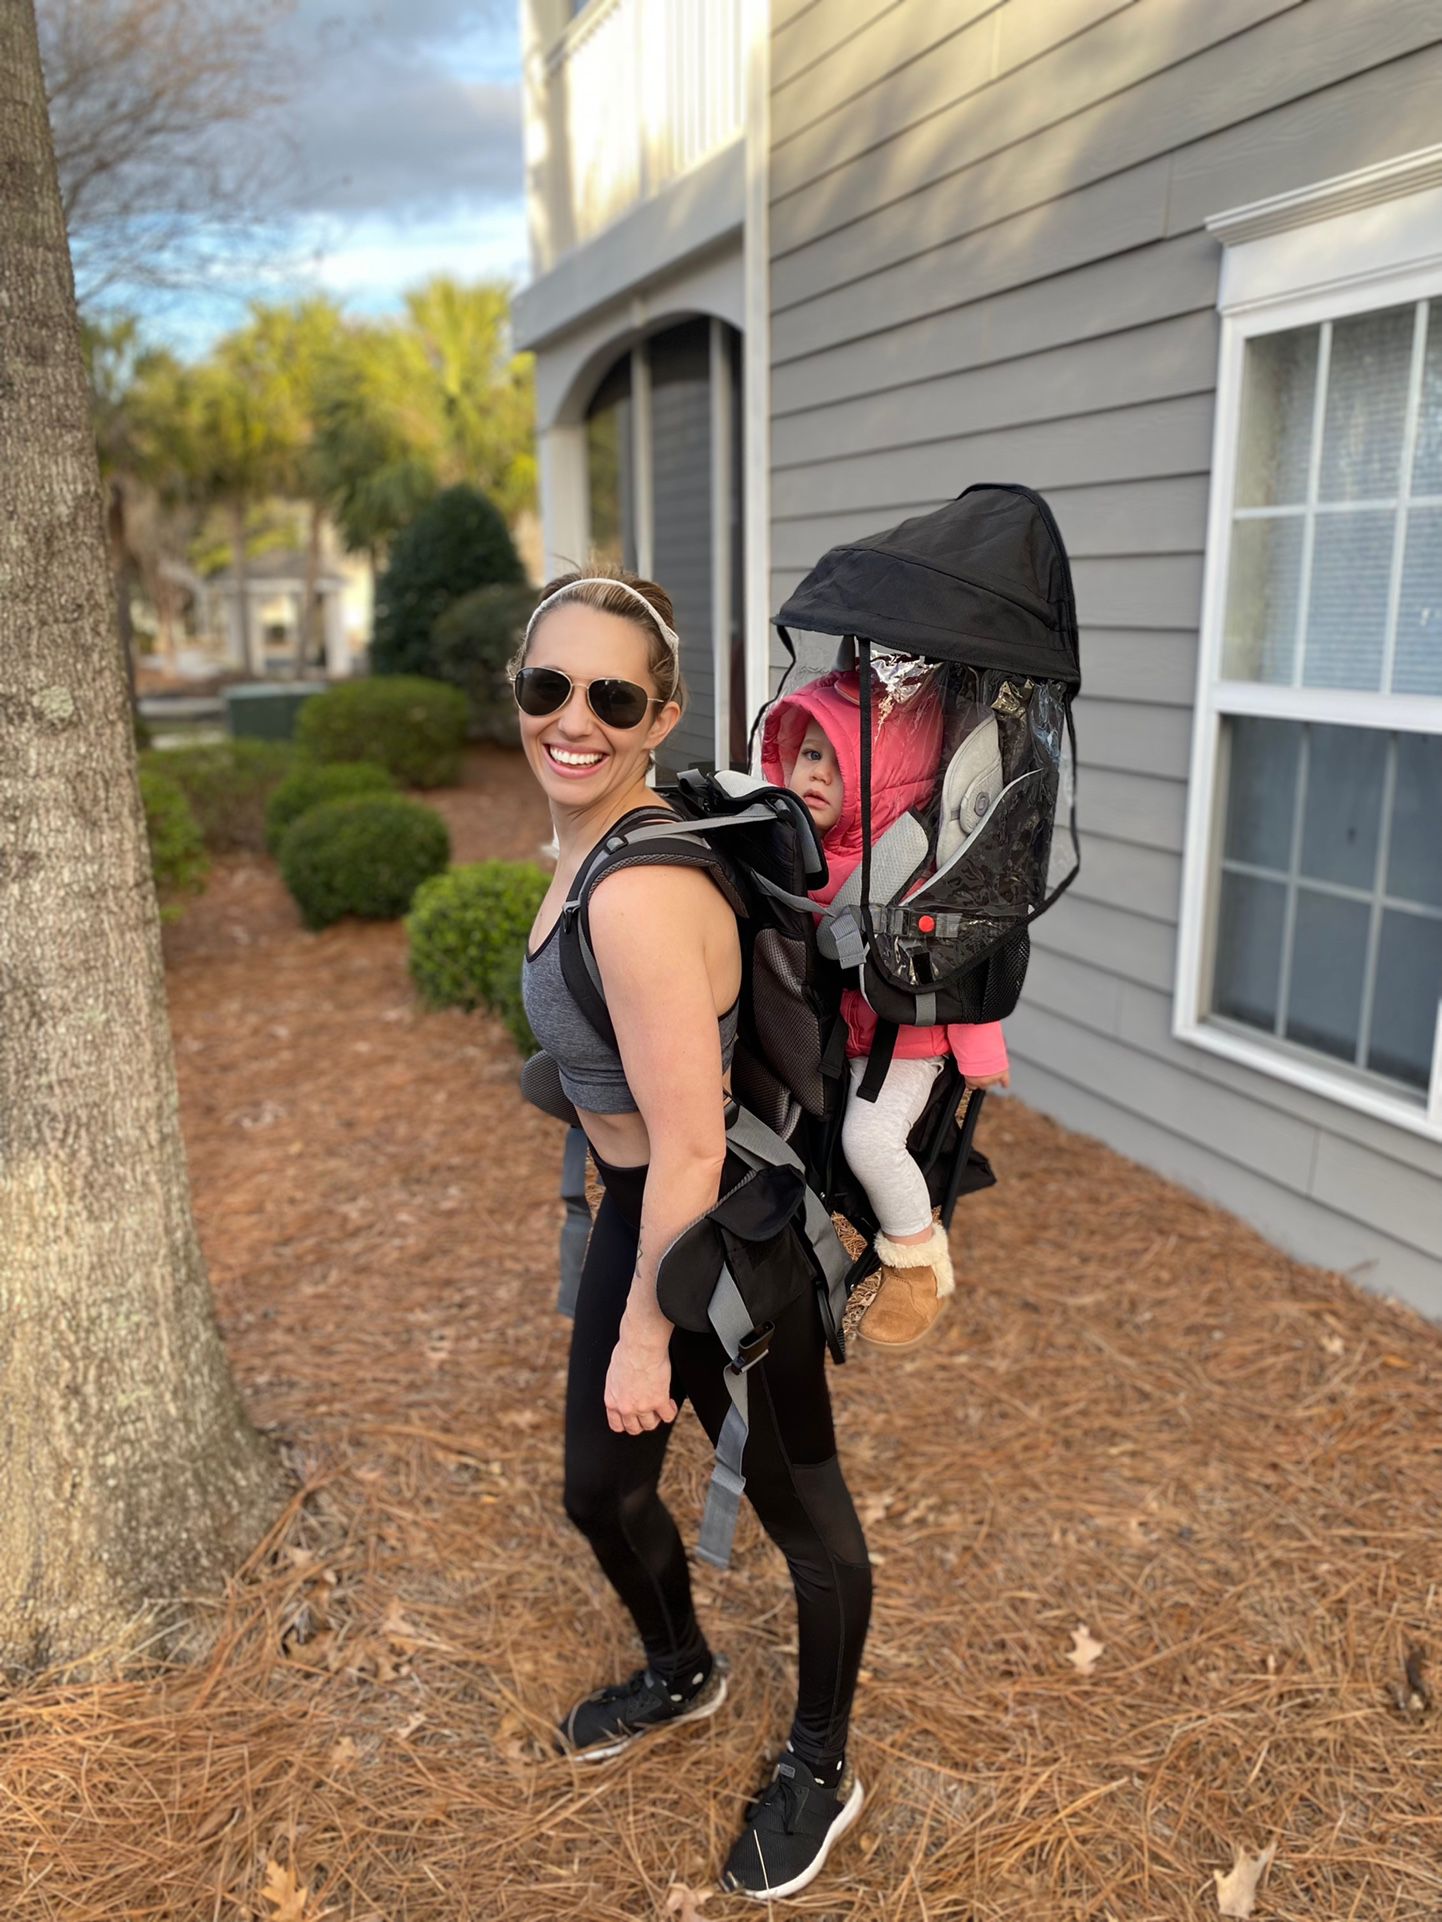 BABY CARRIER HIKER HAS TO GO SO BEST FASTEST OFFER